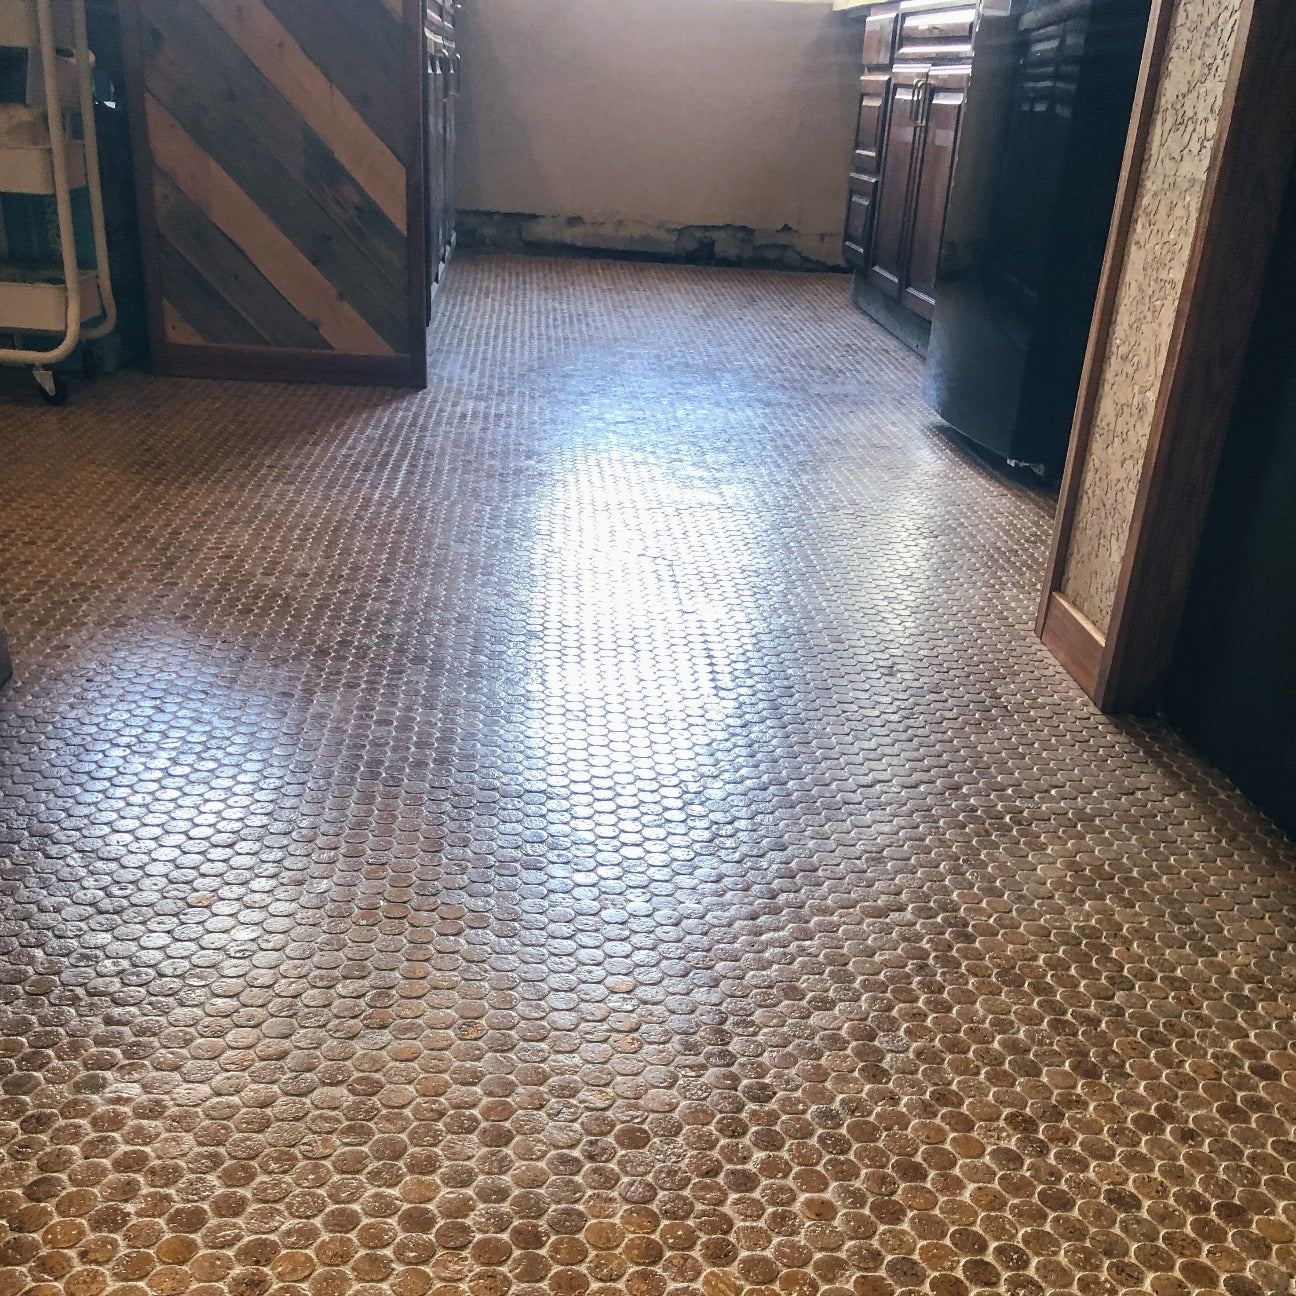 A kitchen floor made of cork penny tiles with a high gloss finish.